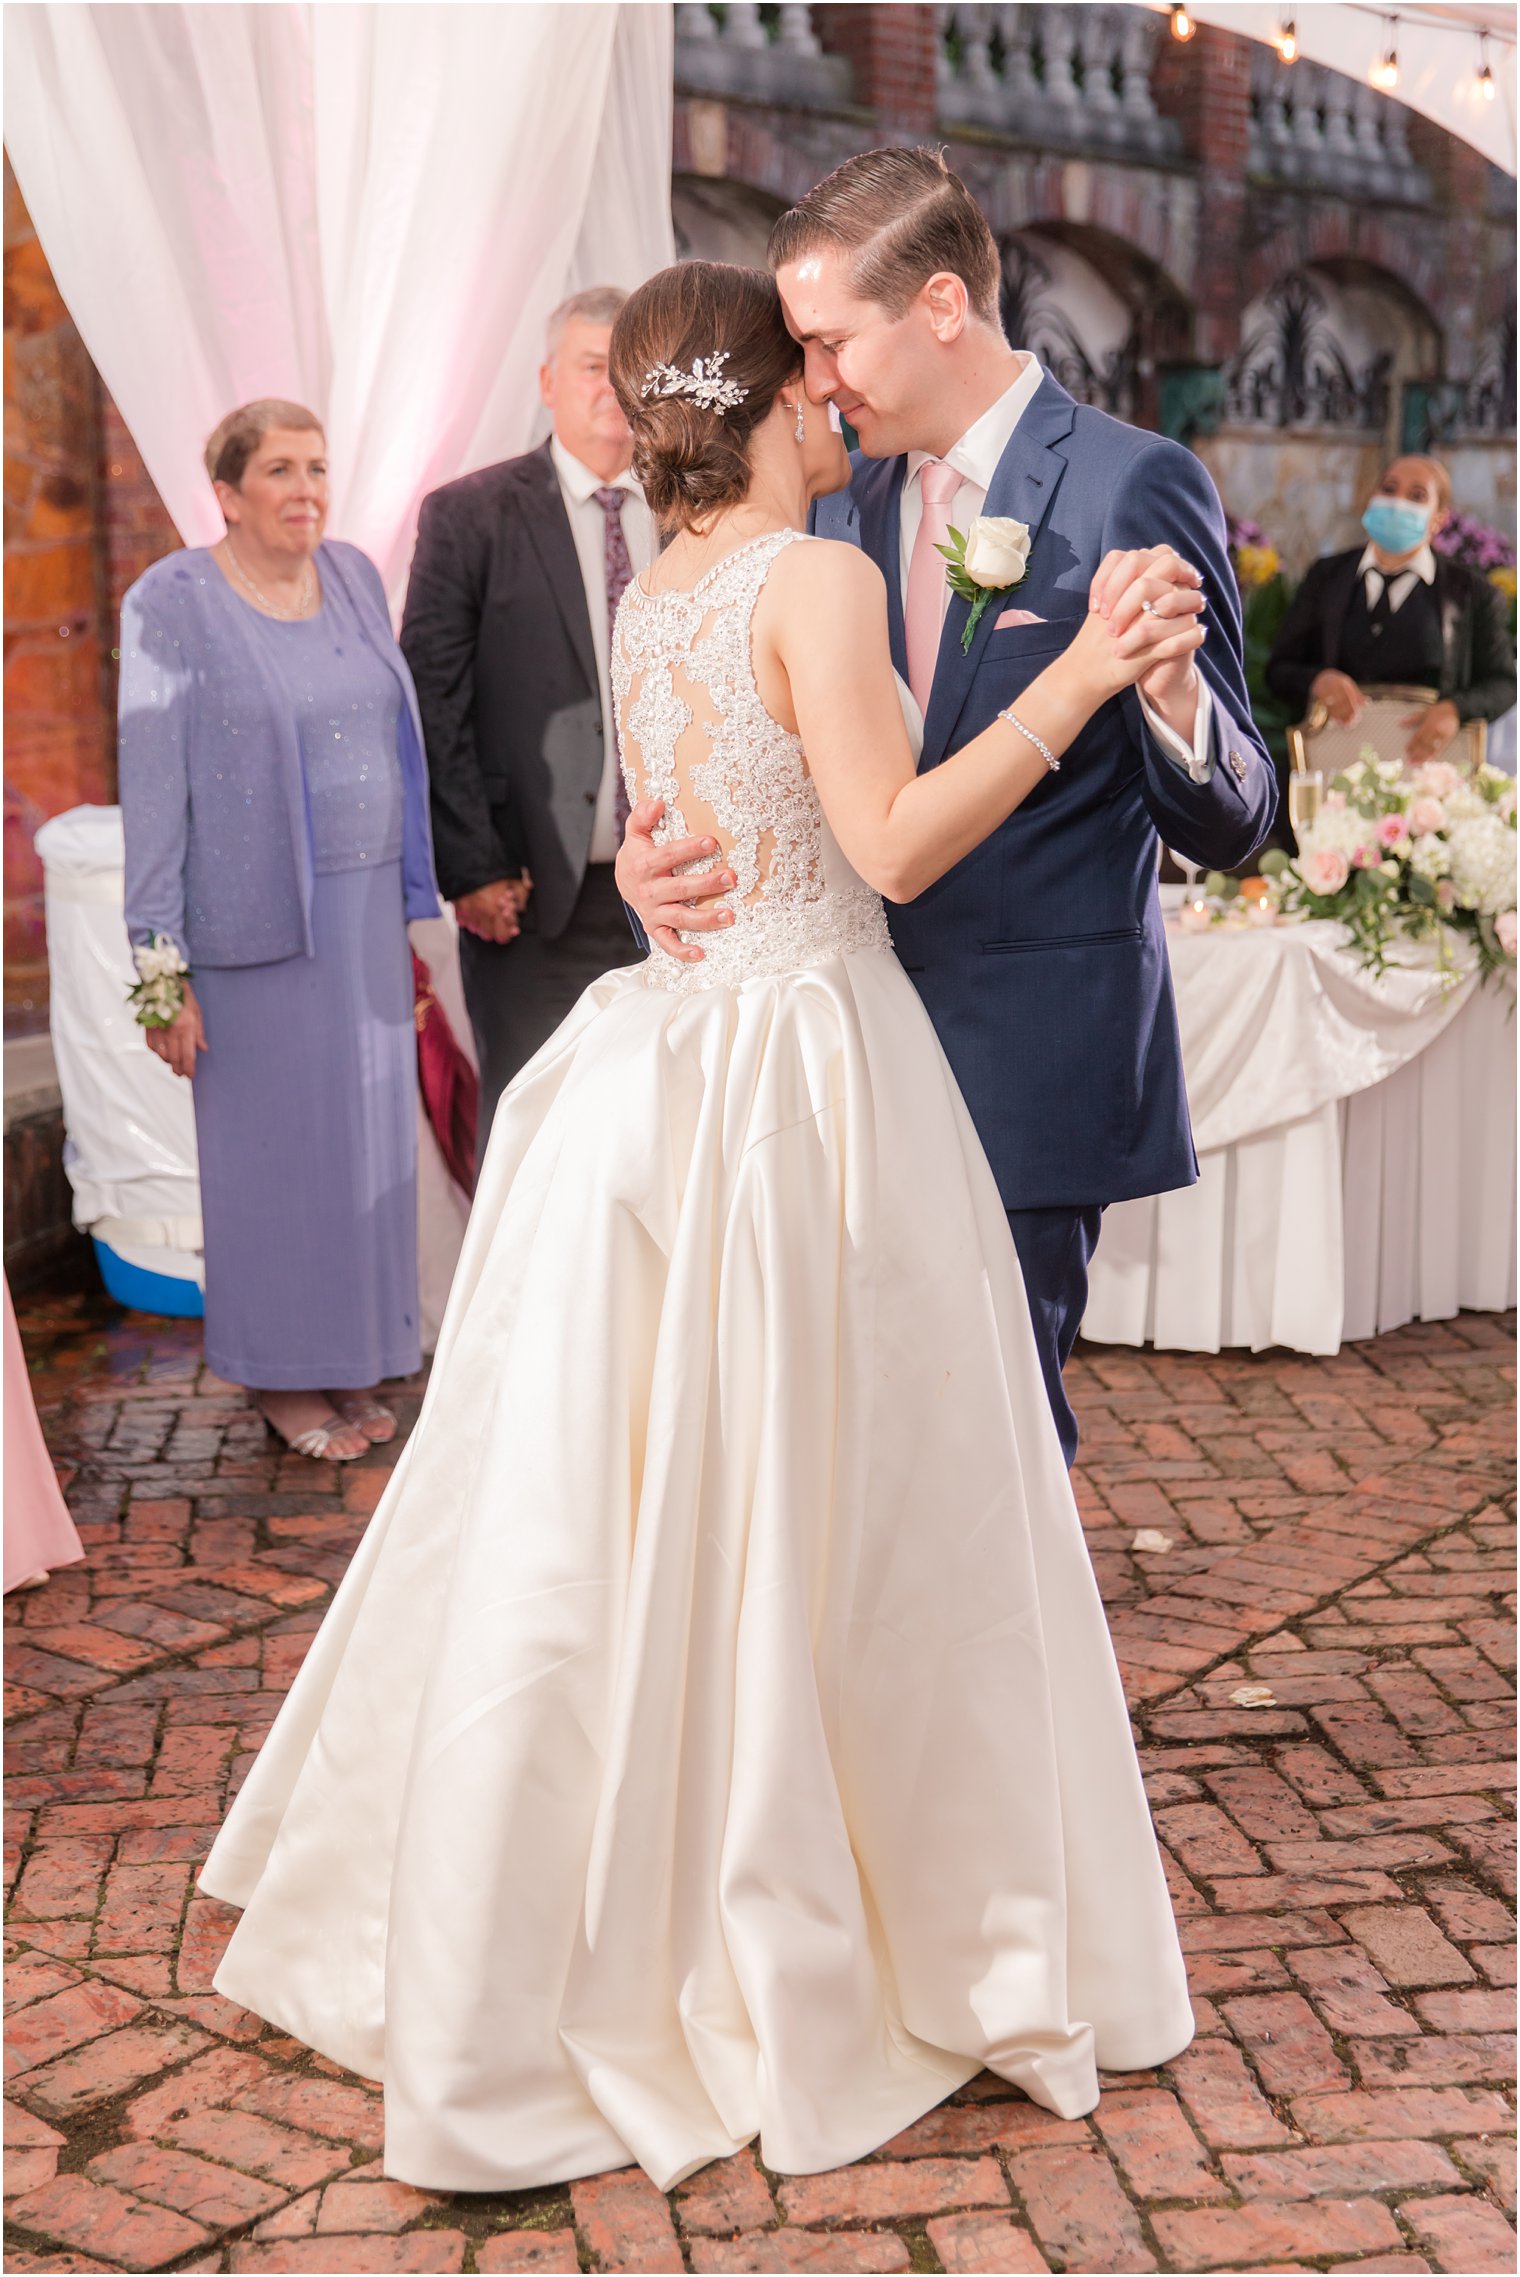 Bride and groom's first dance at The Manor in West Orange Nj